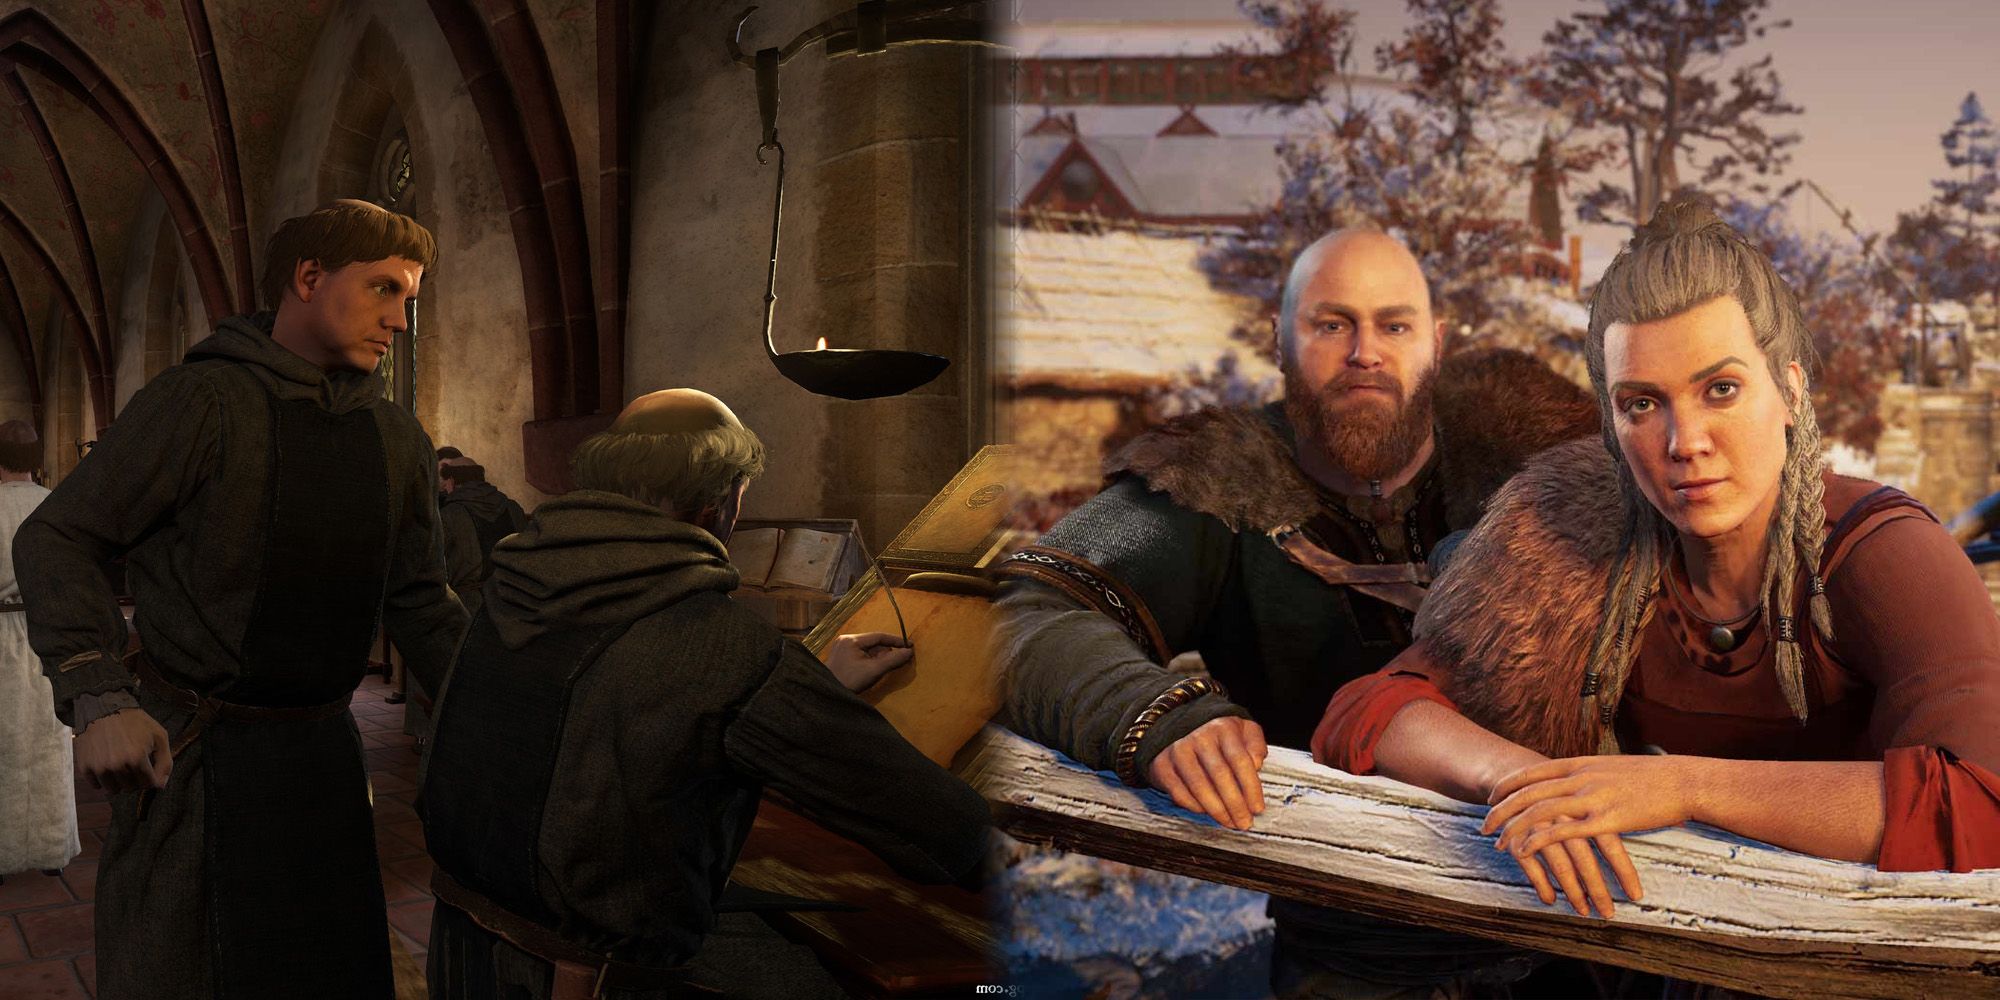 Monks from Kingdom Come Deliverance on left facing away from camera bent chronicle, townspeople from AC Valhalla on right lean over wooden barrier